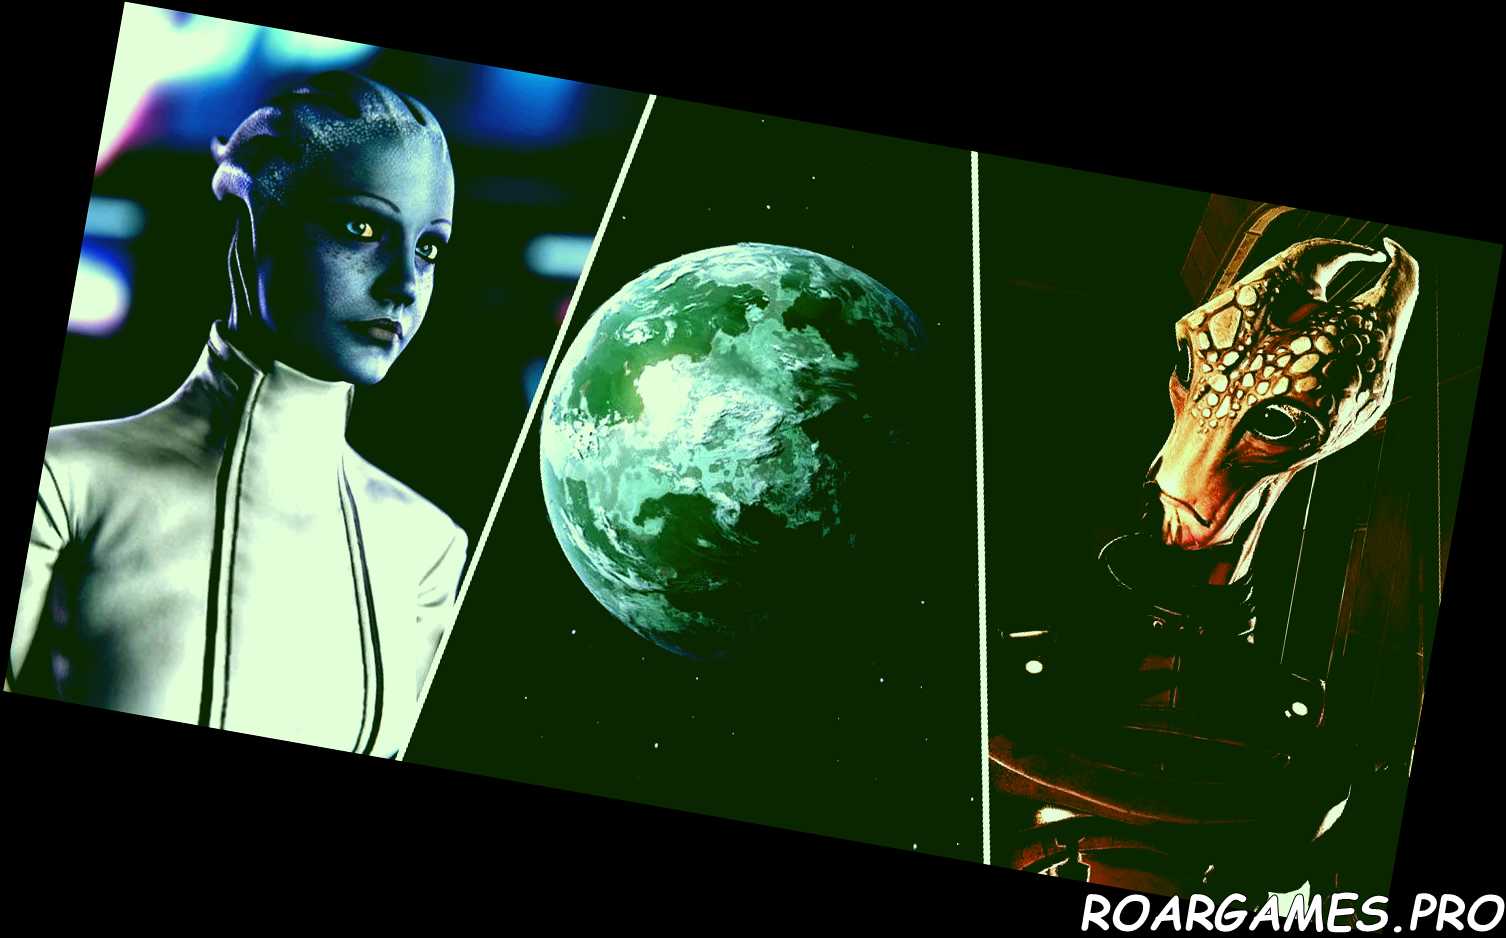 Mass Effect All Known Races And Where Theyre From featured image